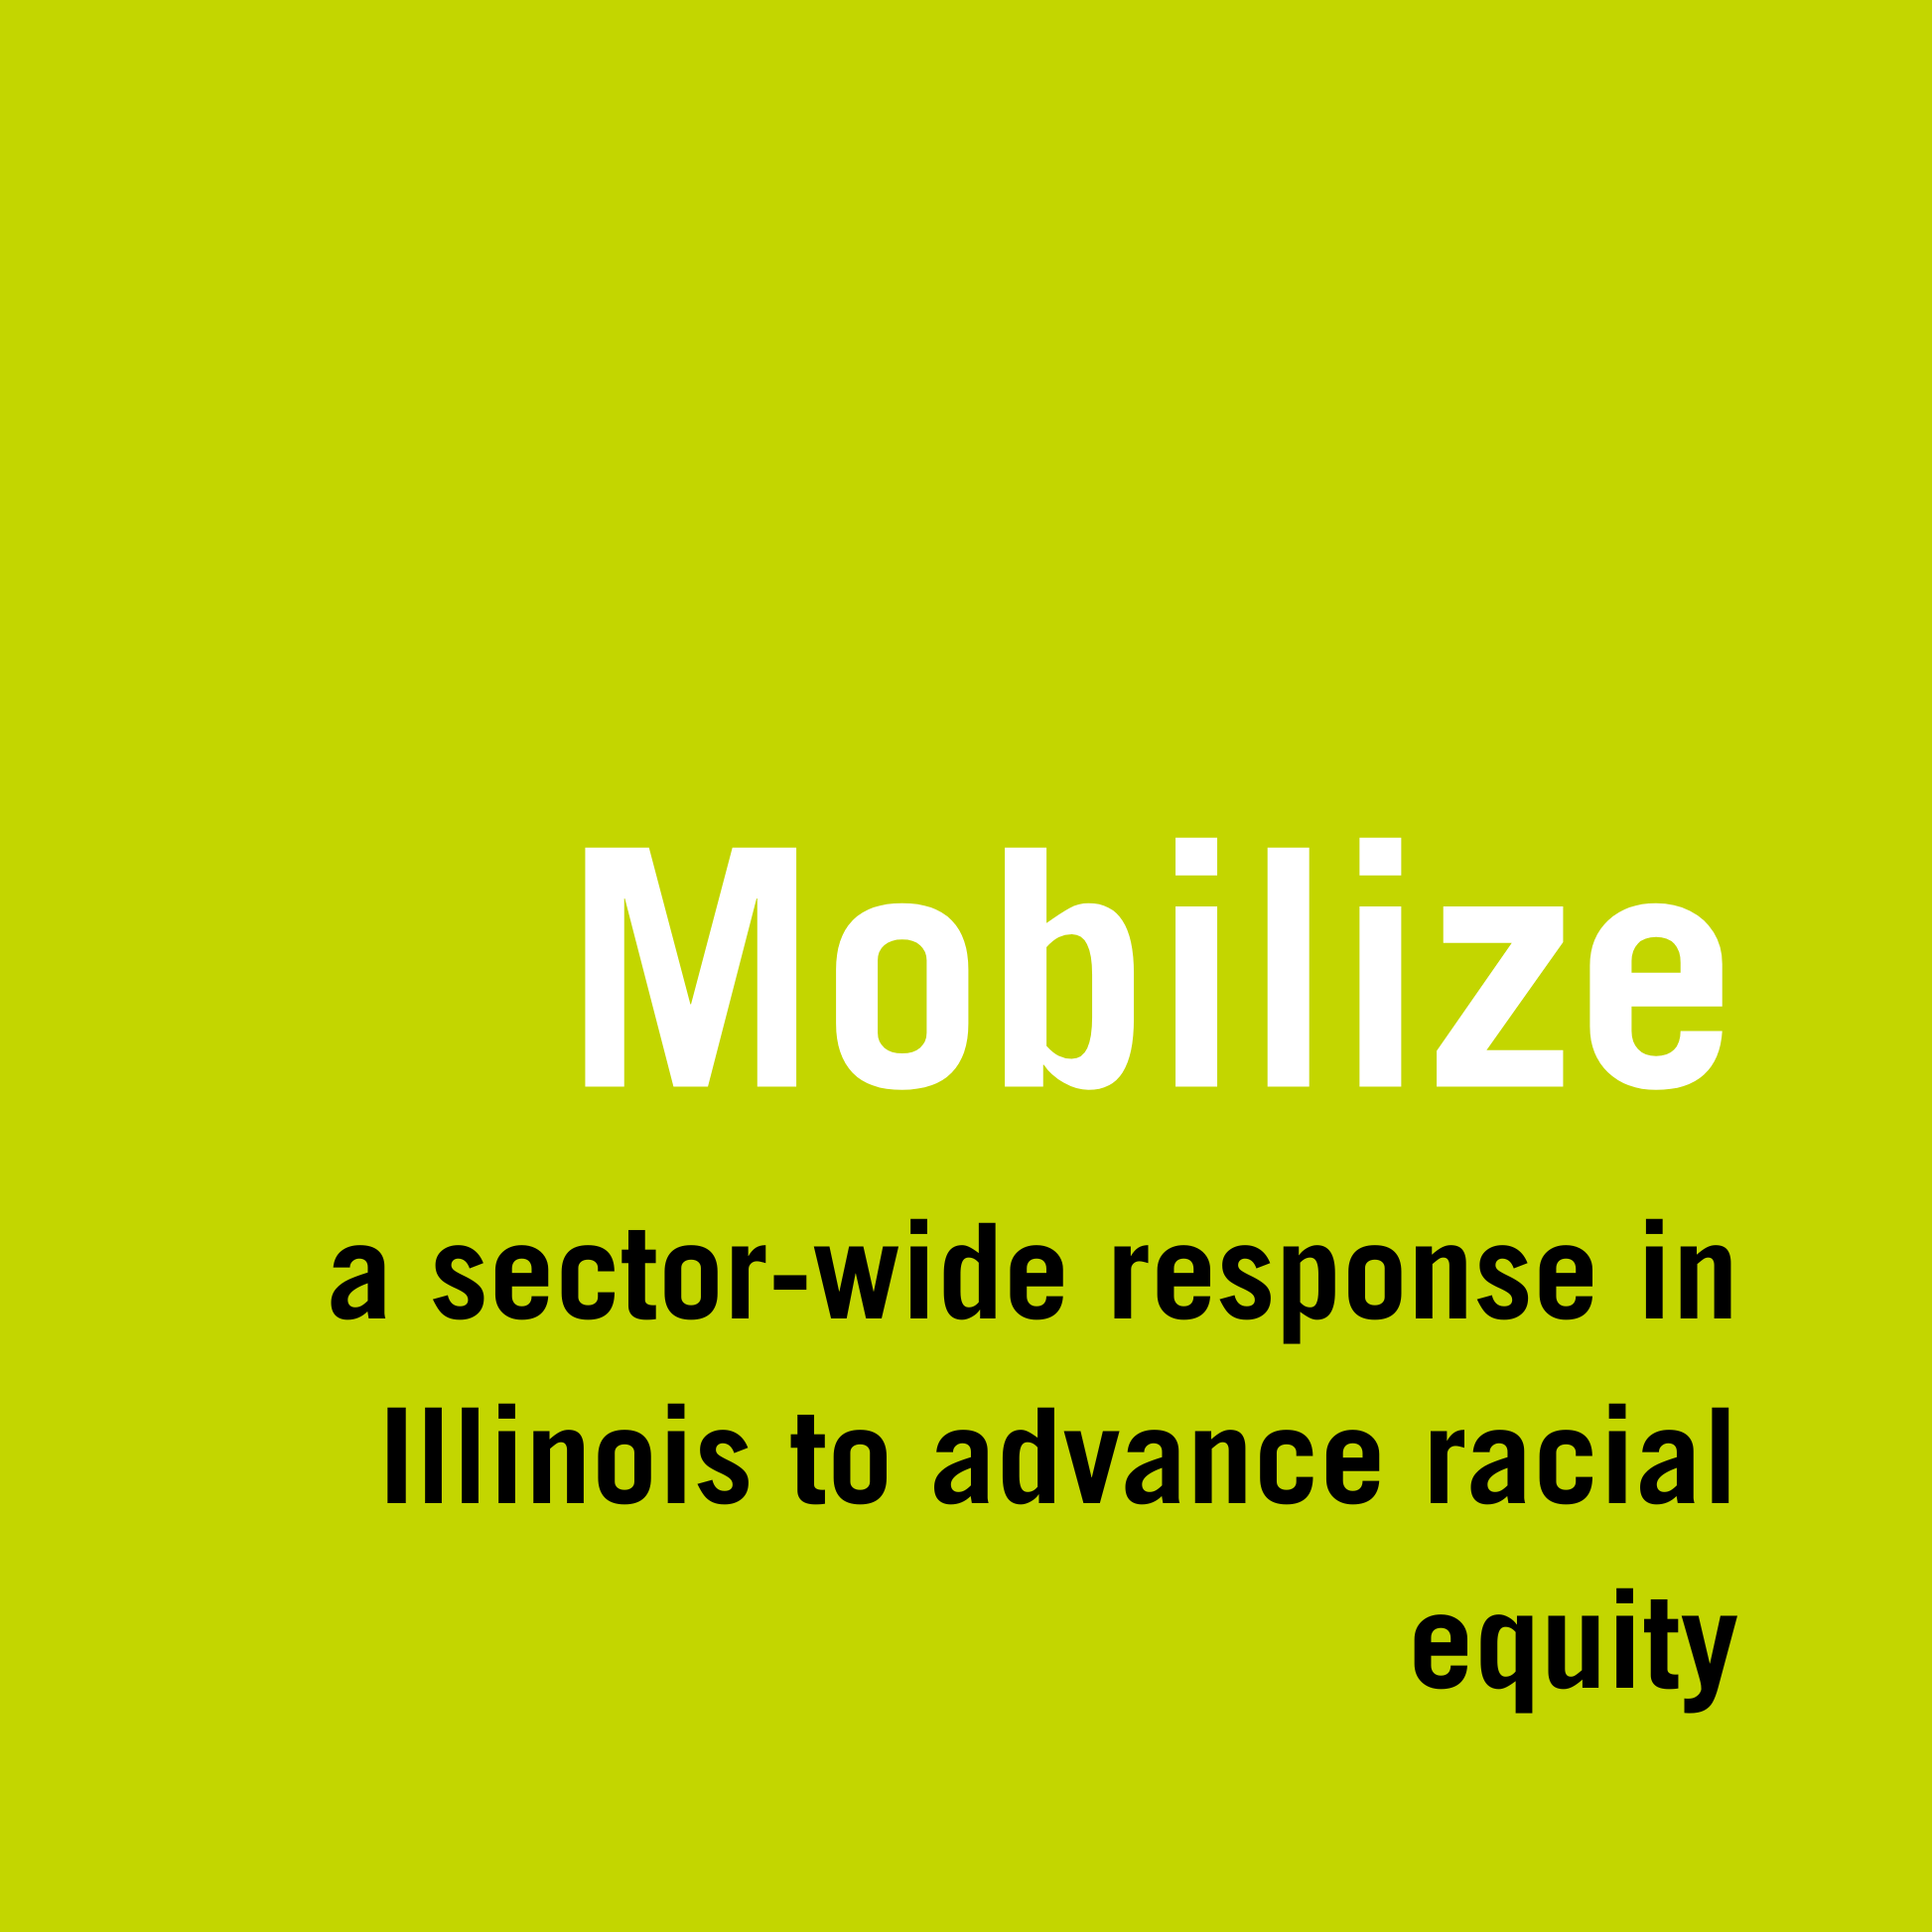 mobilizing a sector-wide response in Illinois to advance racial equity